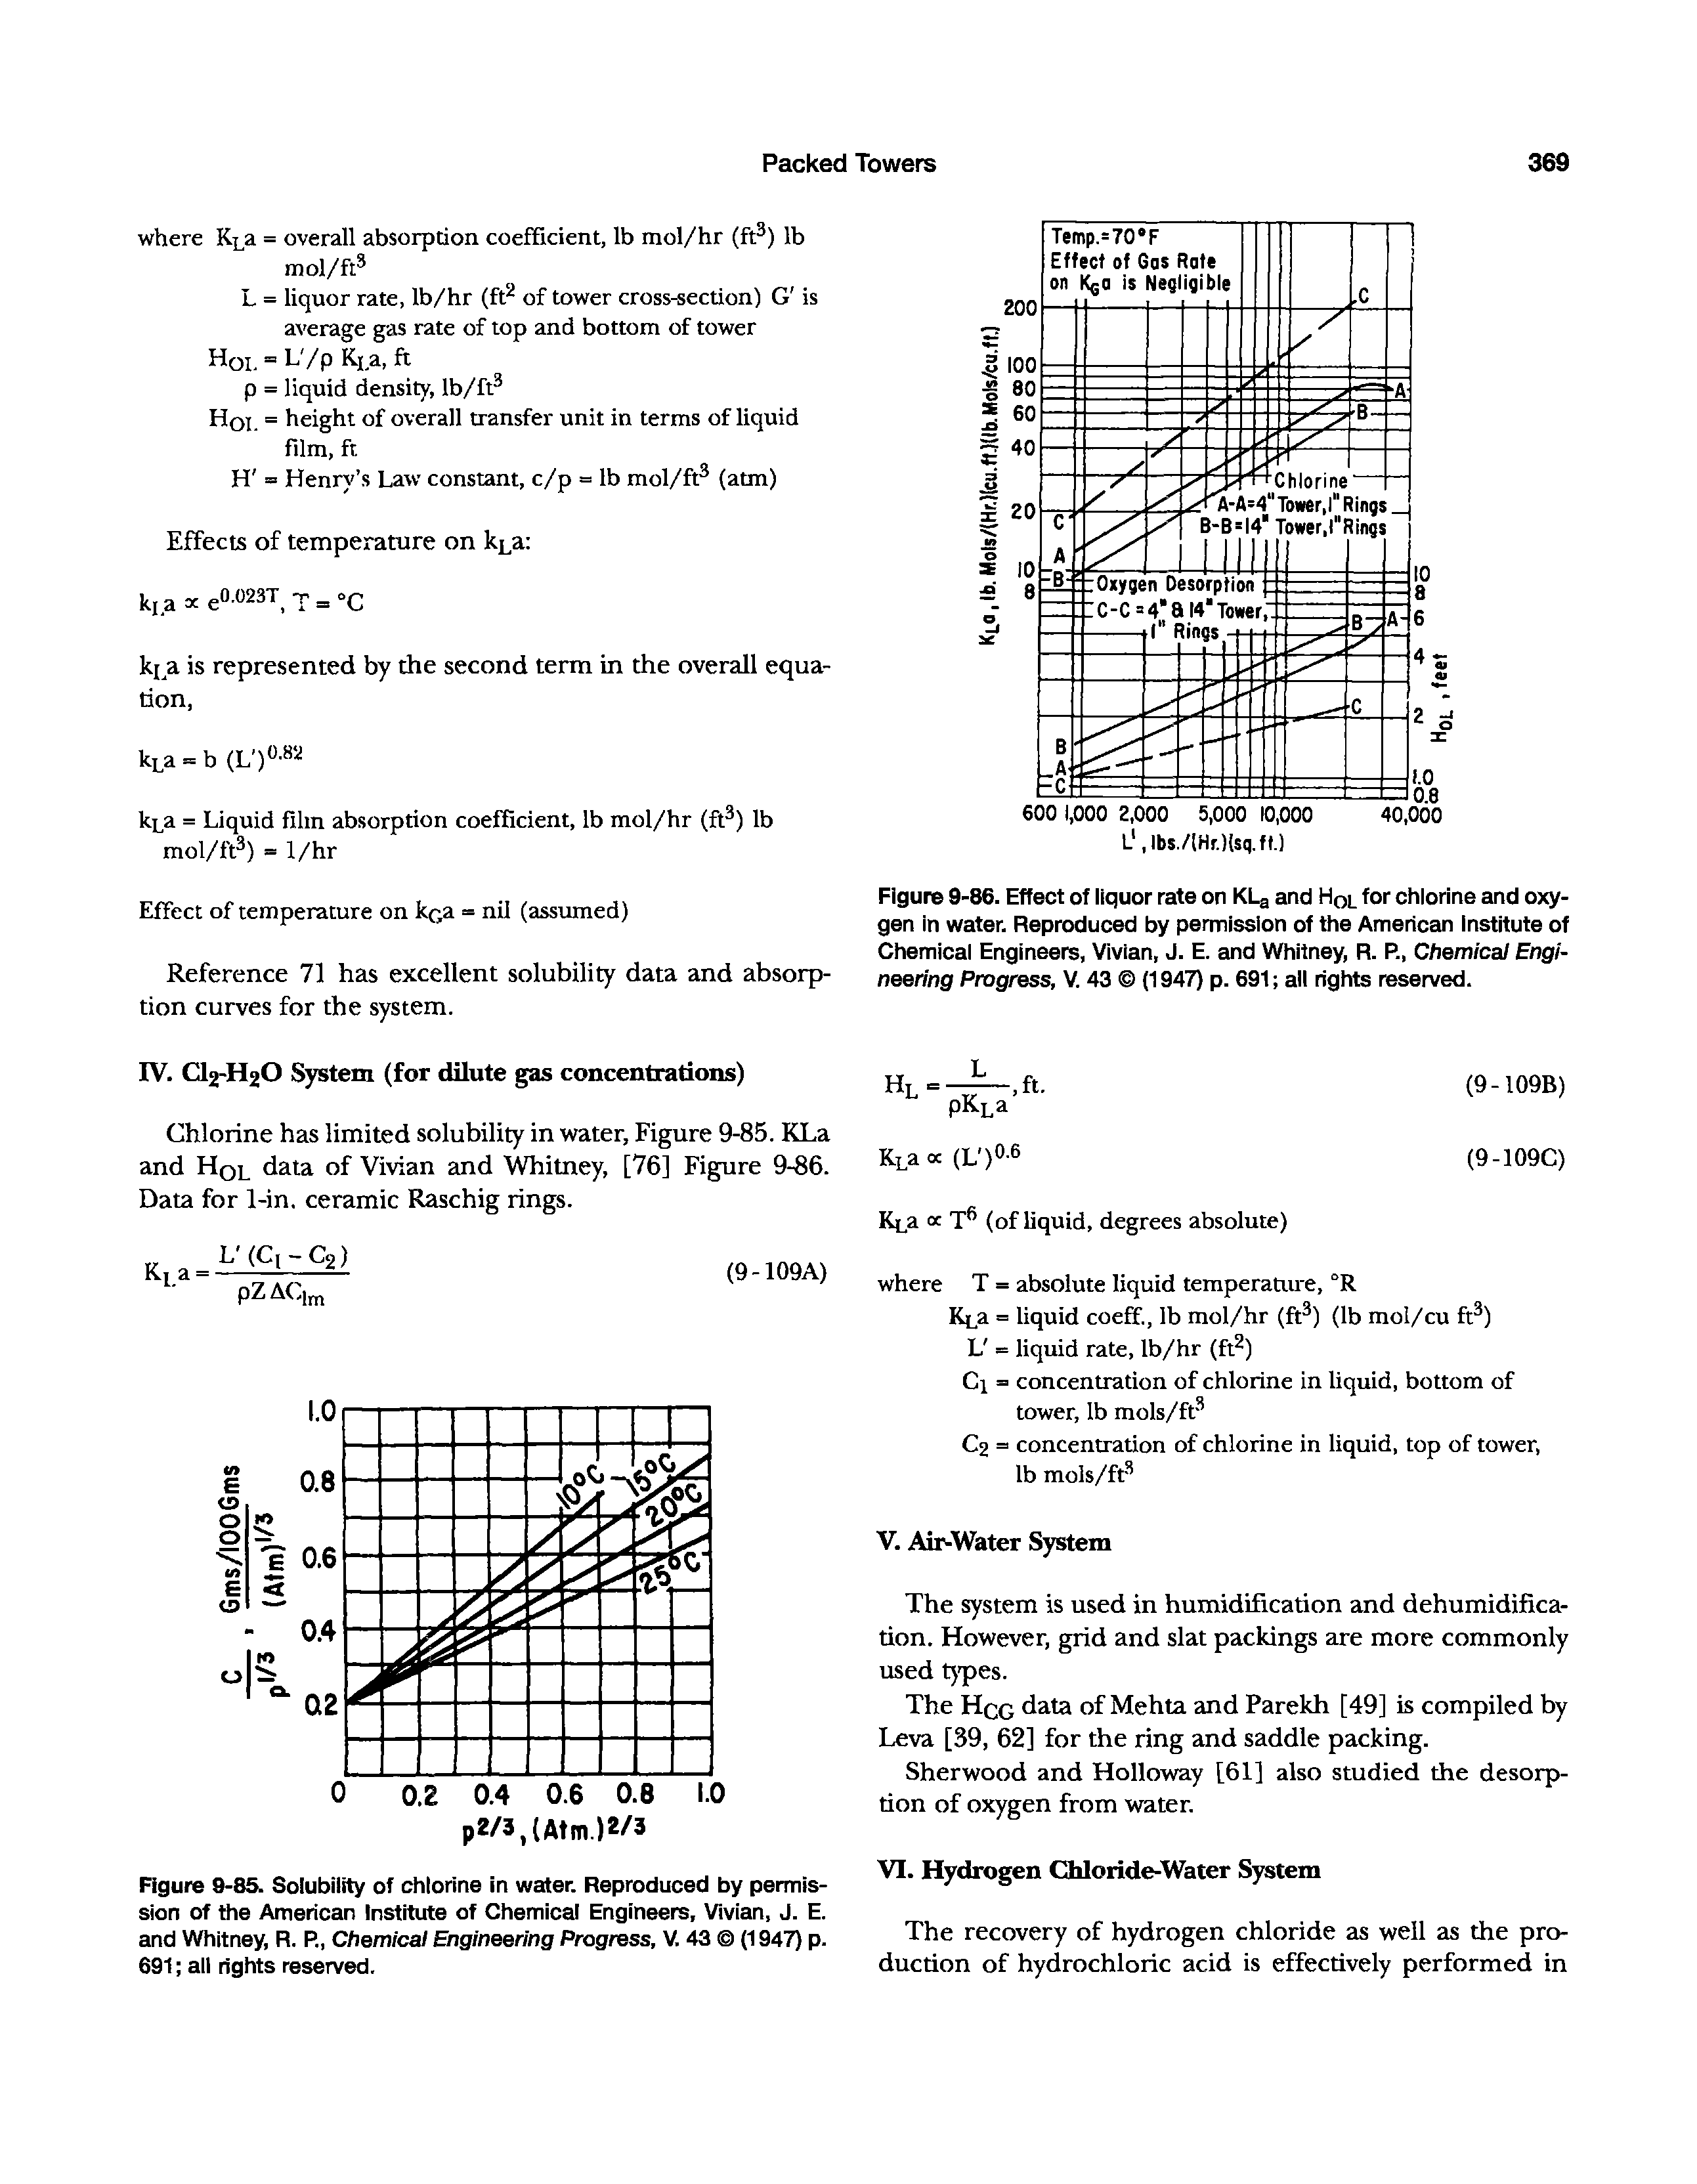 Figure 9-86. Effect of liquor rate on KLg and Hql for chlorine and oxygen in water. Reproduced by permission of the American Institute of Chemical Engineers, Vivian, J. E. and Whitney, R. R, Chemical Engineering Progress, V. 43 (1947) p. 691 all rights reserved.